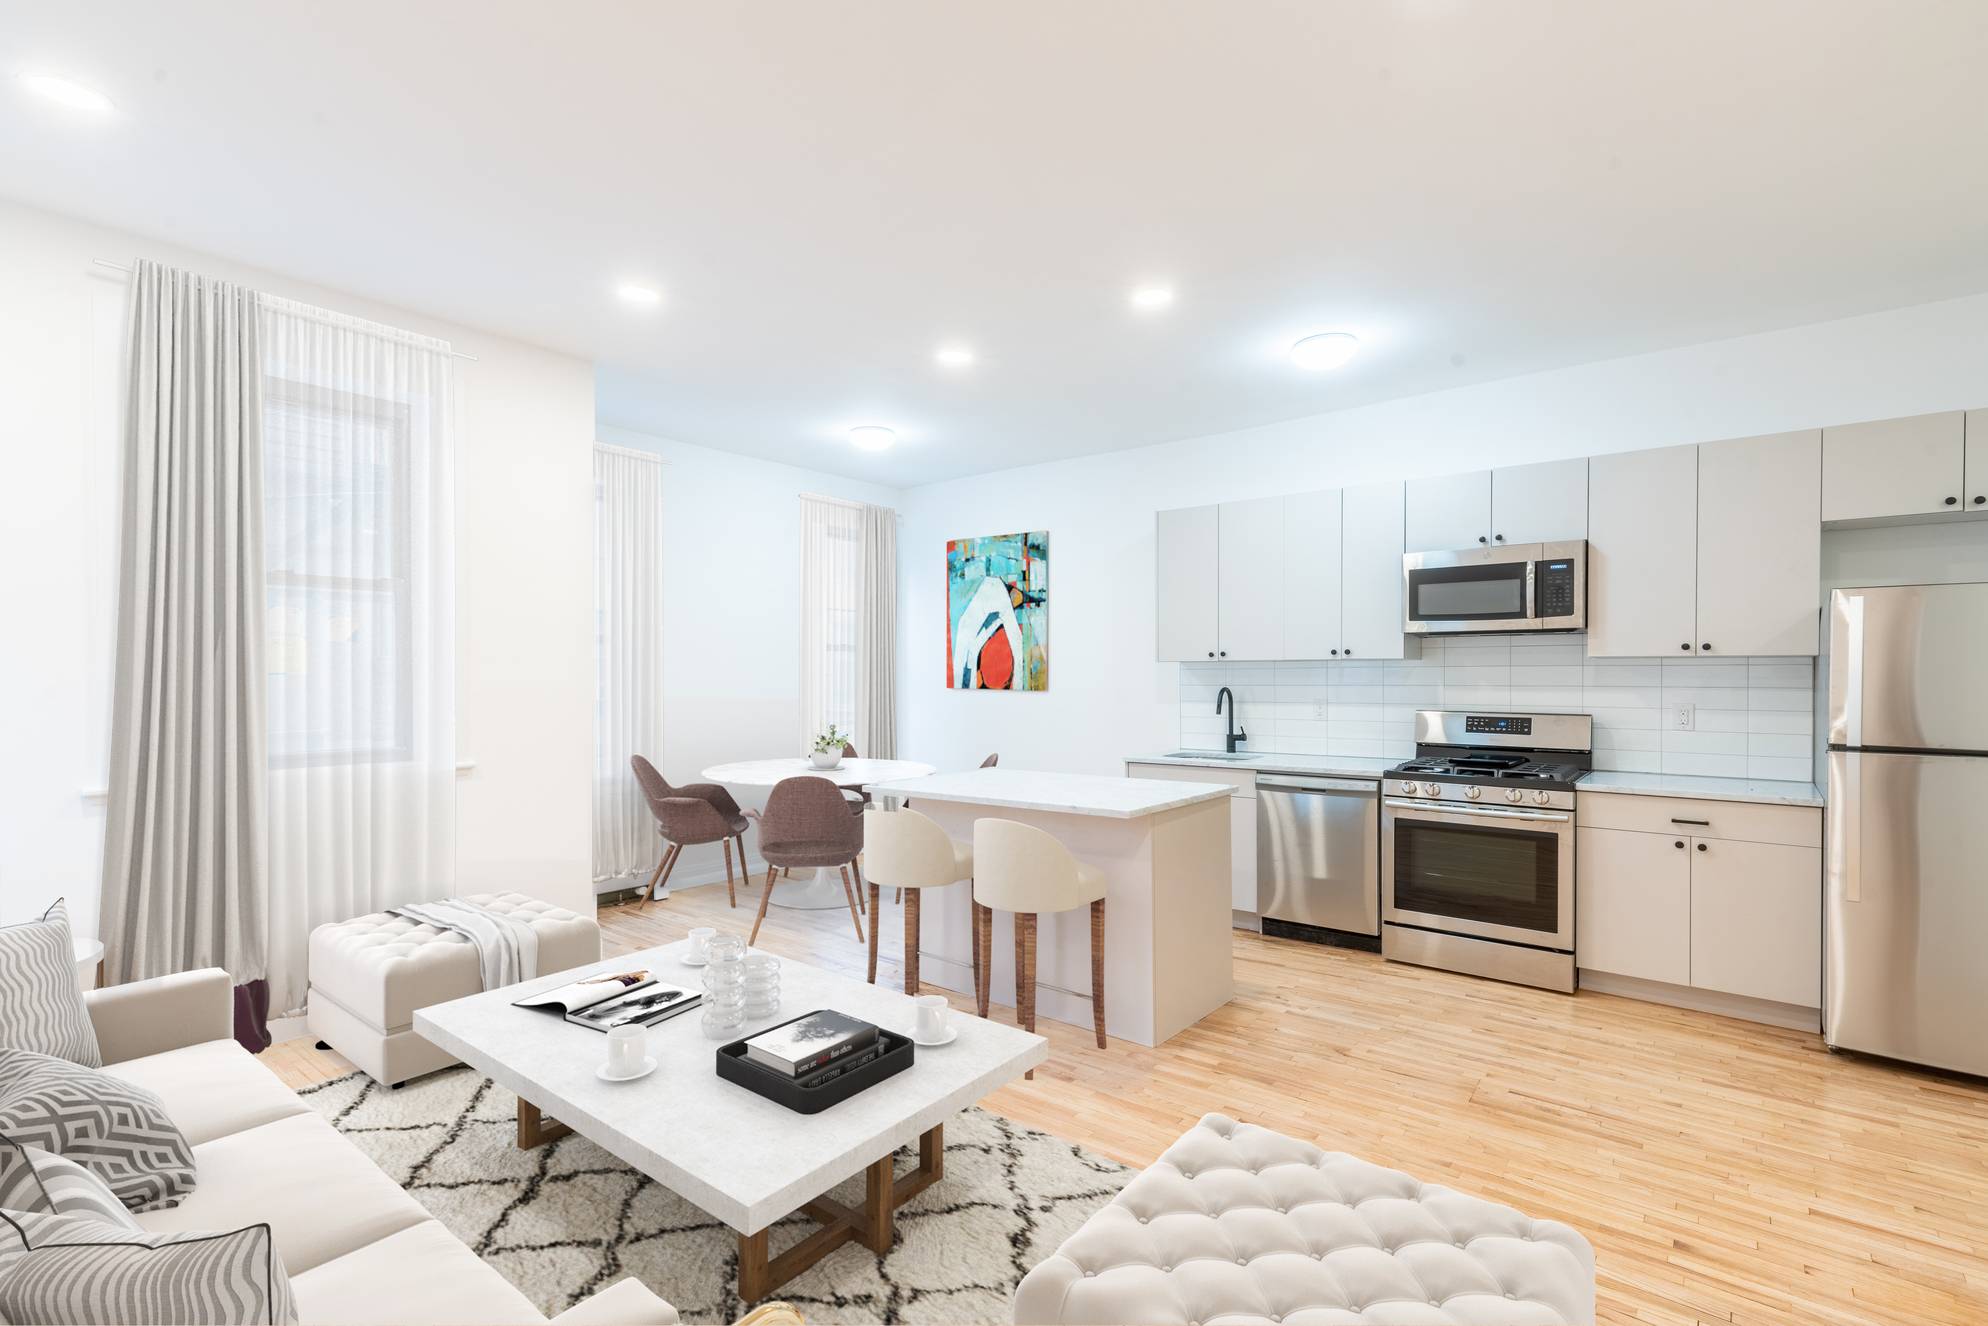 Beautifully Renovated 2 Bedroom 1.5 Bath Apartment located in Uptown Hoboken, NJ.  No Brokers Fee and 1 Month Free.